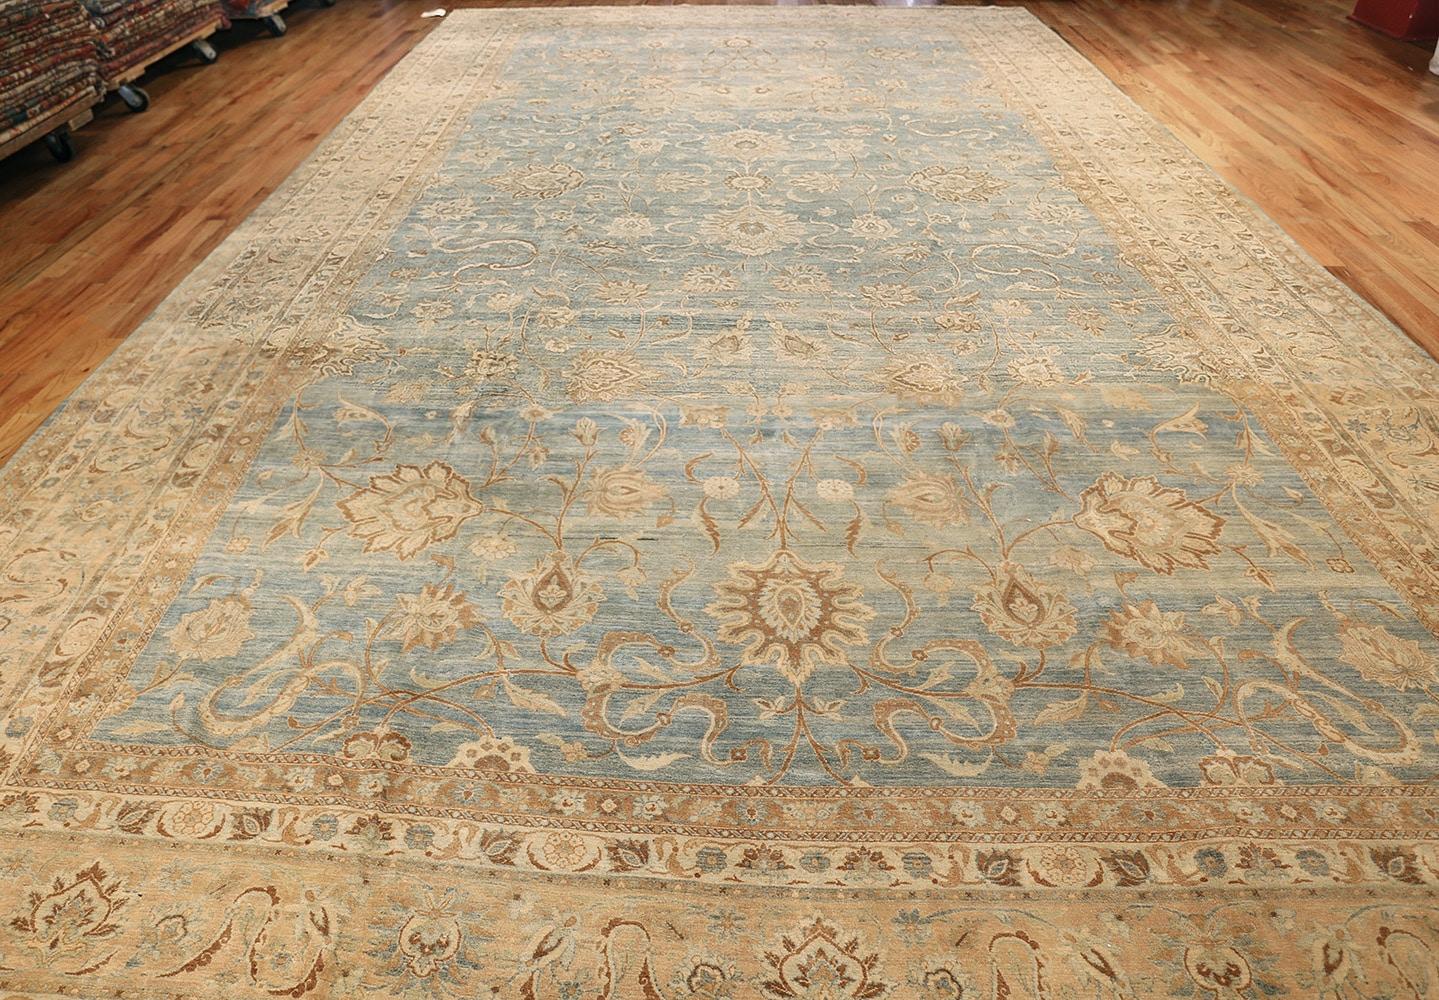 Antique Persian Kerman rug, country of origin: Persia, date: circa 1900. Size: 10 ft 9 in x 20 ft (3.28 m x 6.1 m)

Here is an absolutely delightful antique Oriental Rug. This beautifully composed antique Kerman piece – one of the more desirable